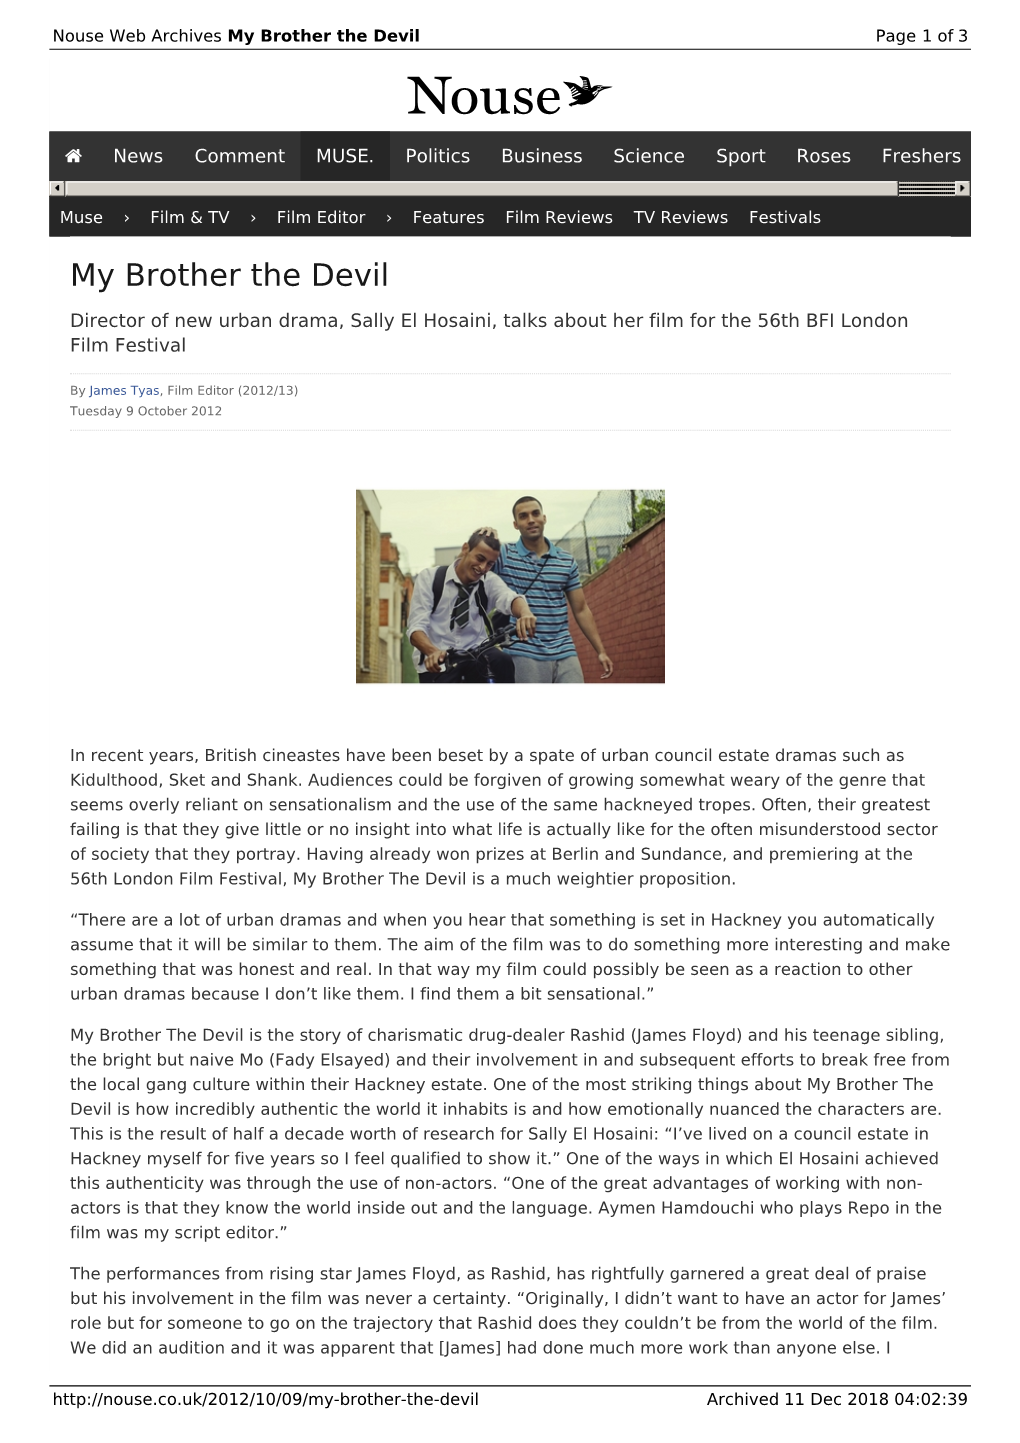 My Brother the Devil | Nouse